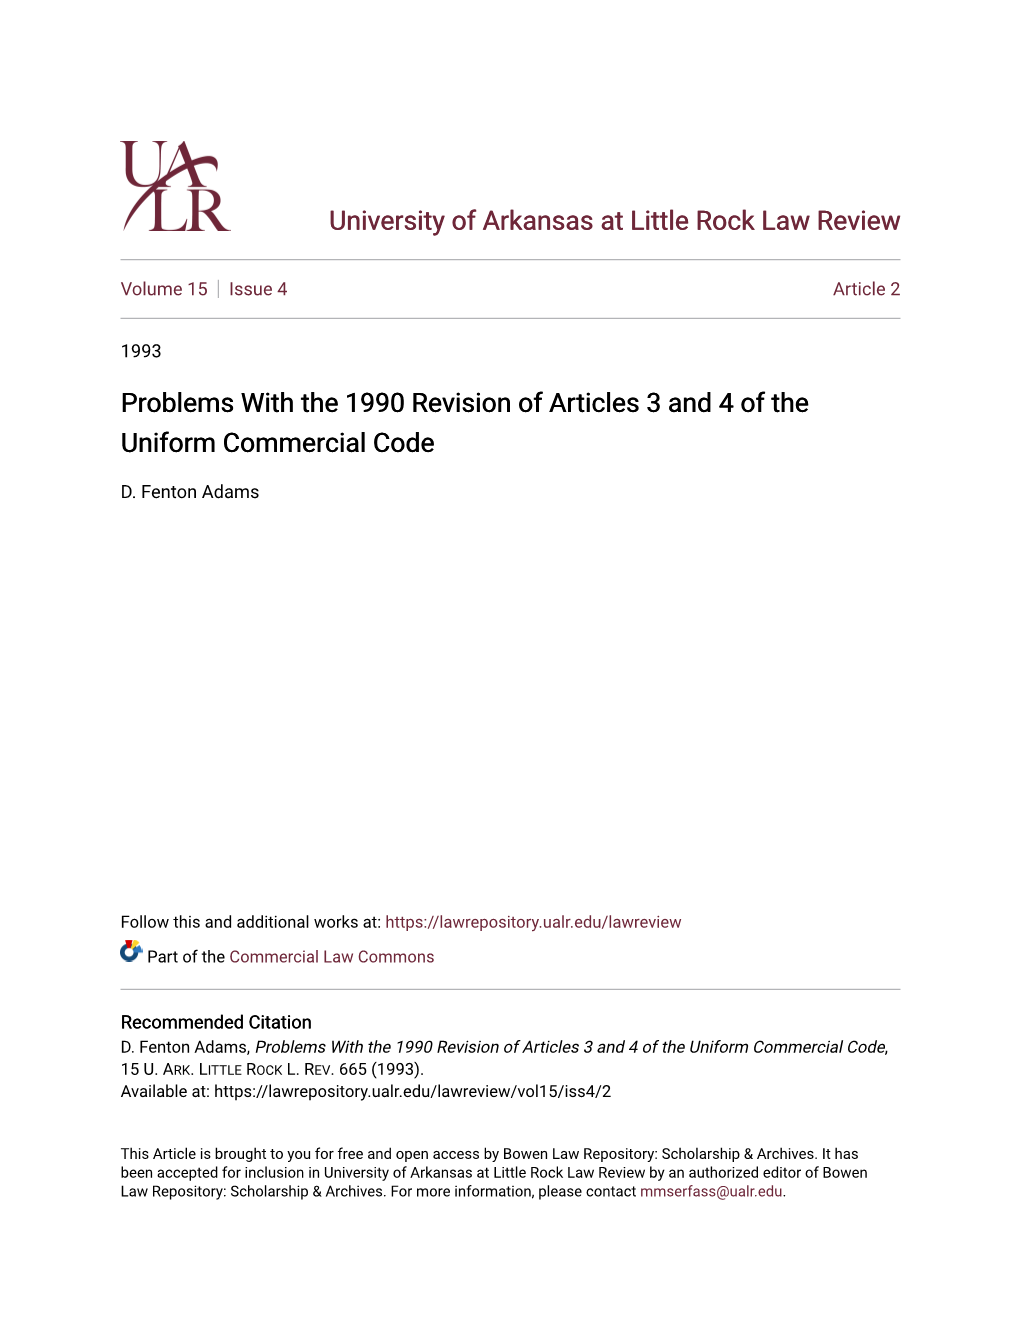 Problems with the 1990 Revision of Articles 3 and 4 of the Uniform Commercial Code